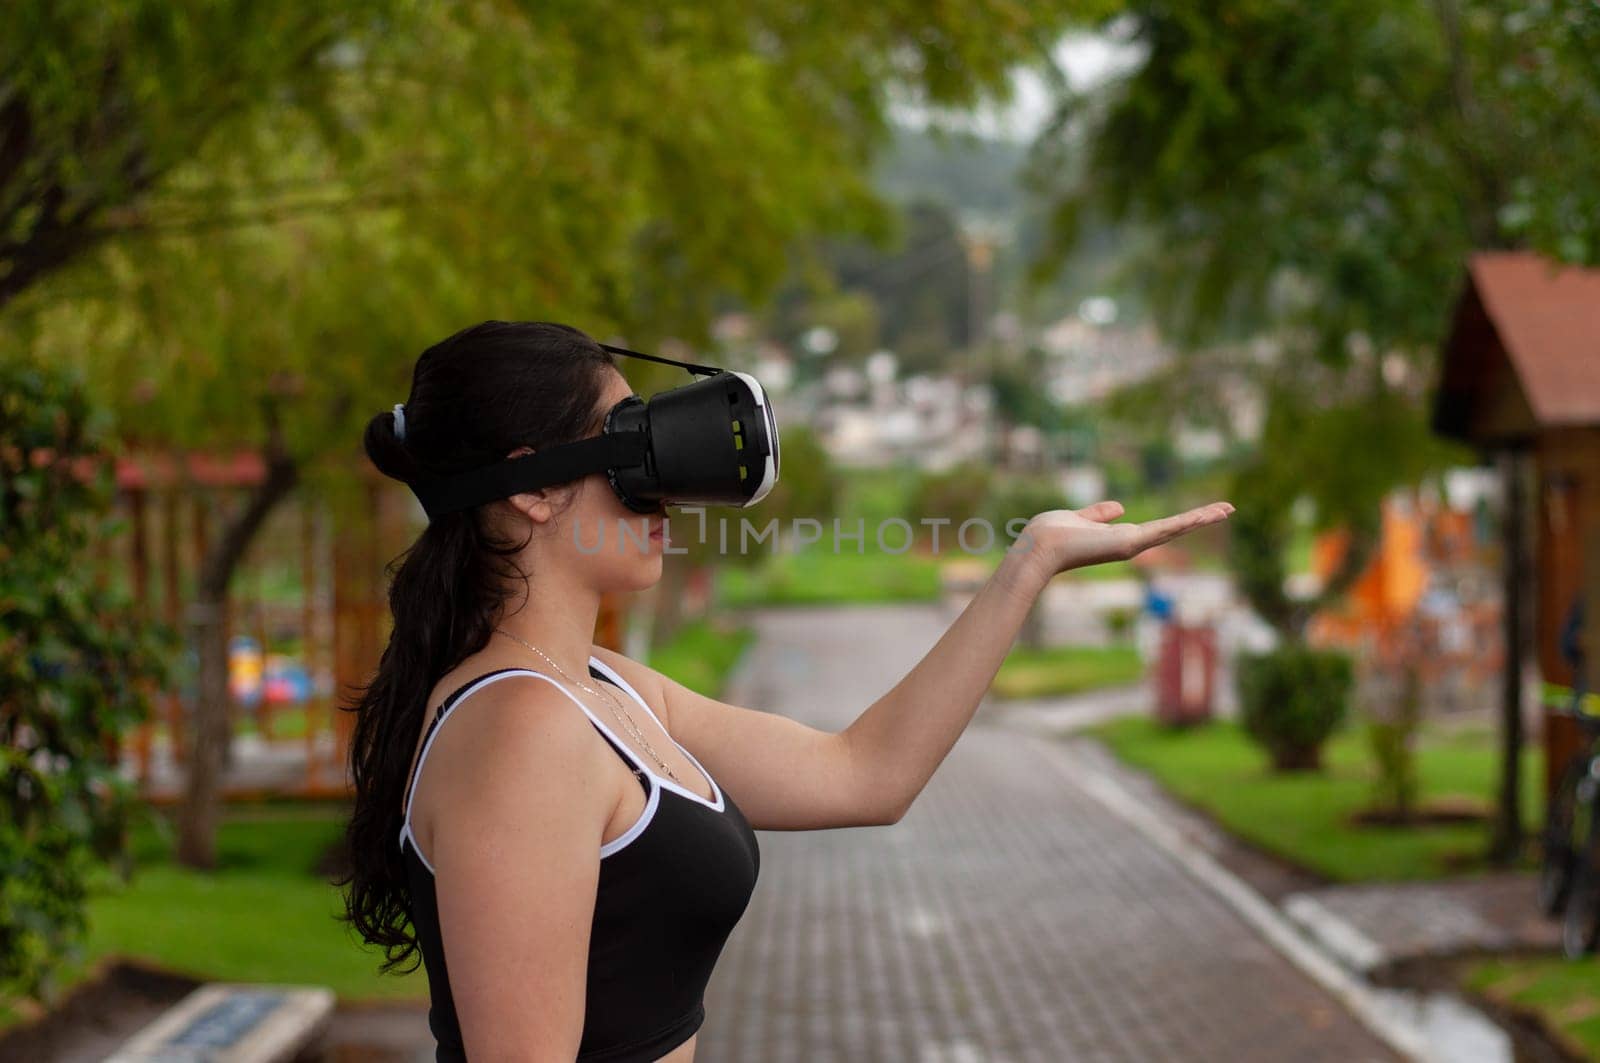 copyspace of a girl wearing virtual reality goggles and sportswear with her hand in the air in a public park. by Raulmartin